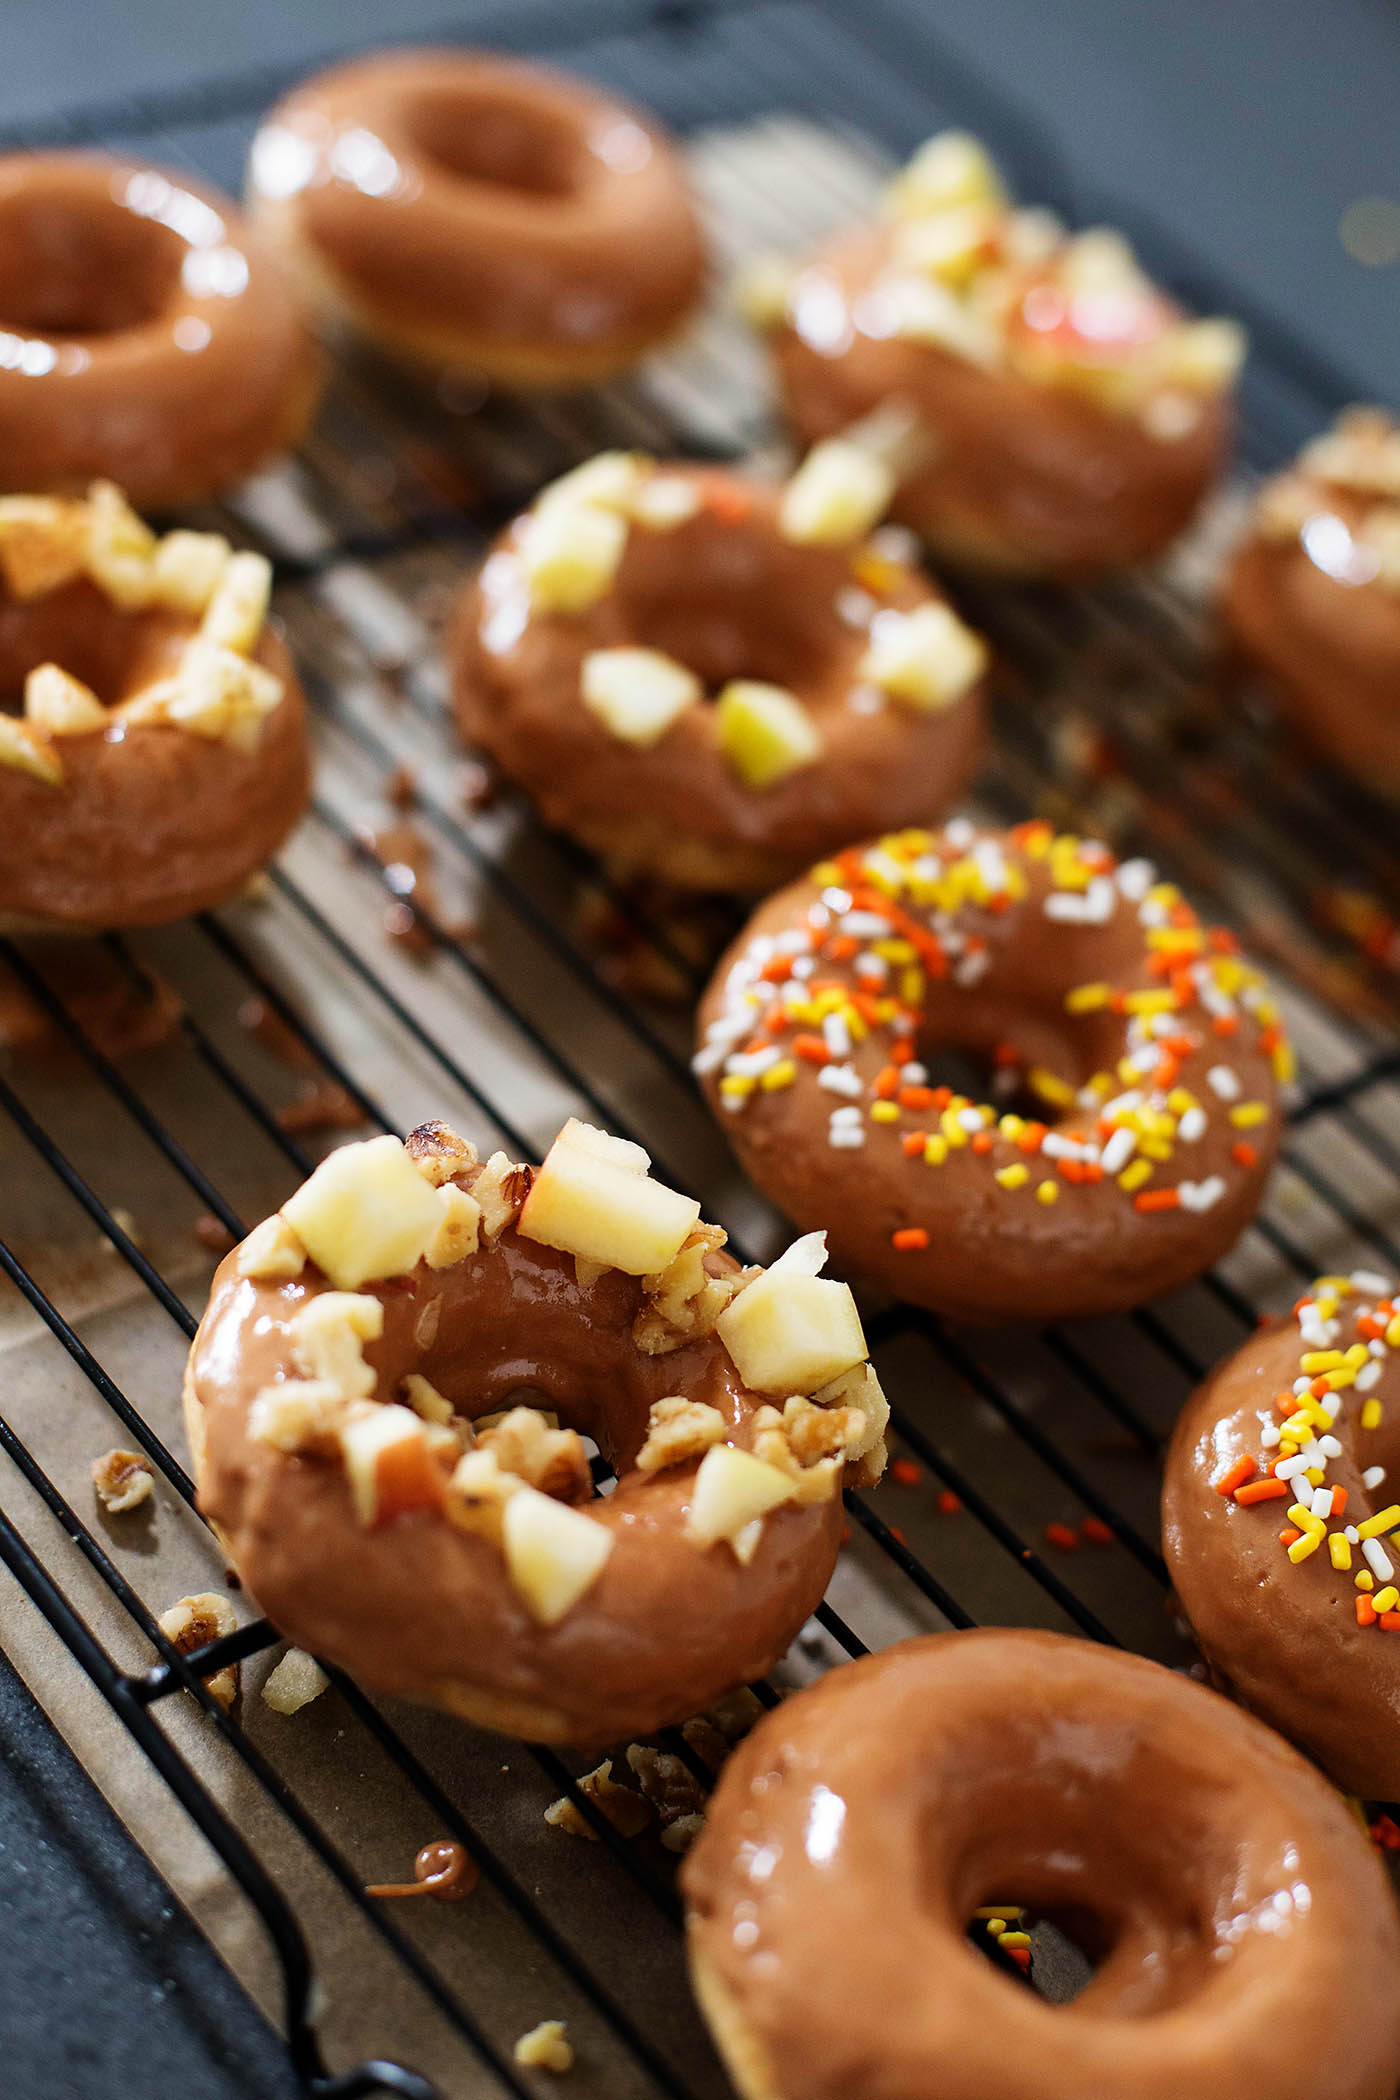 Baked donuts from a cake mix